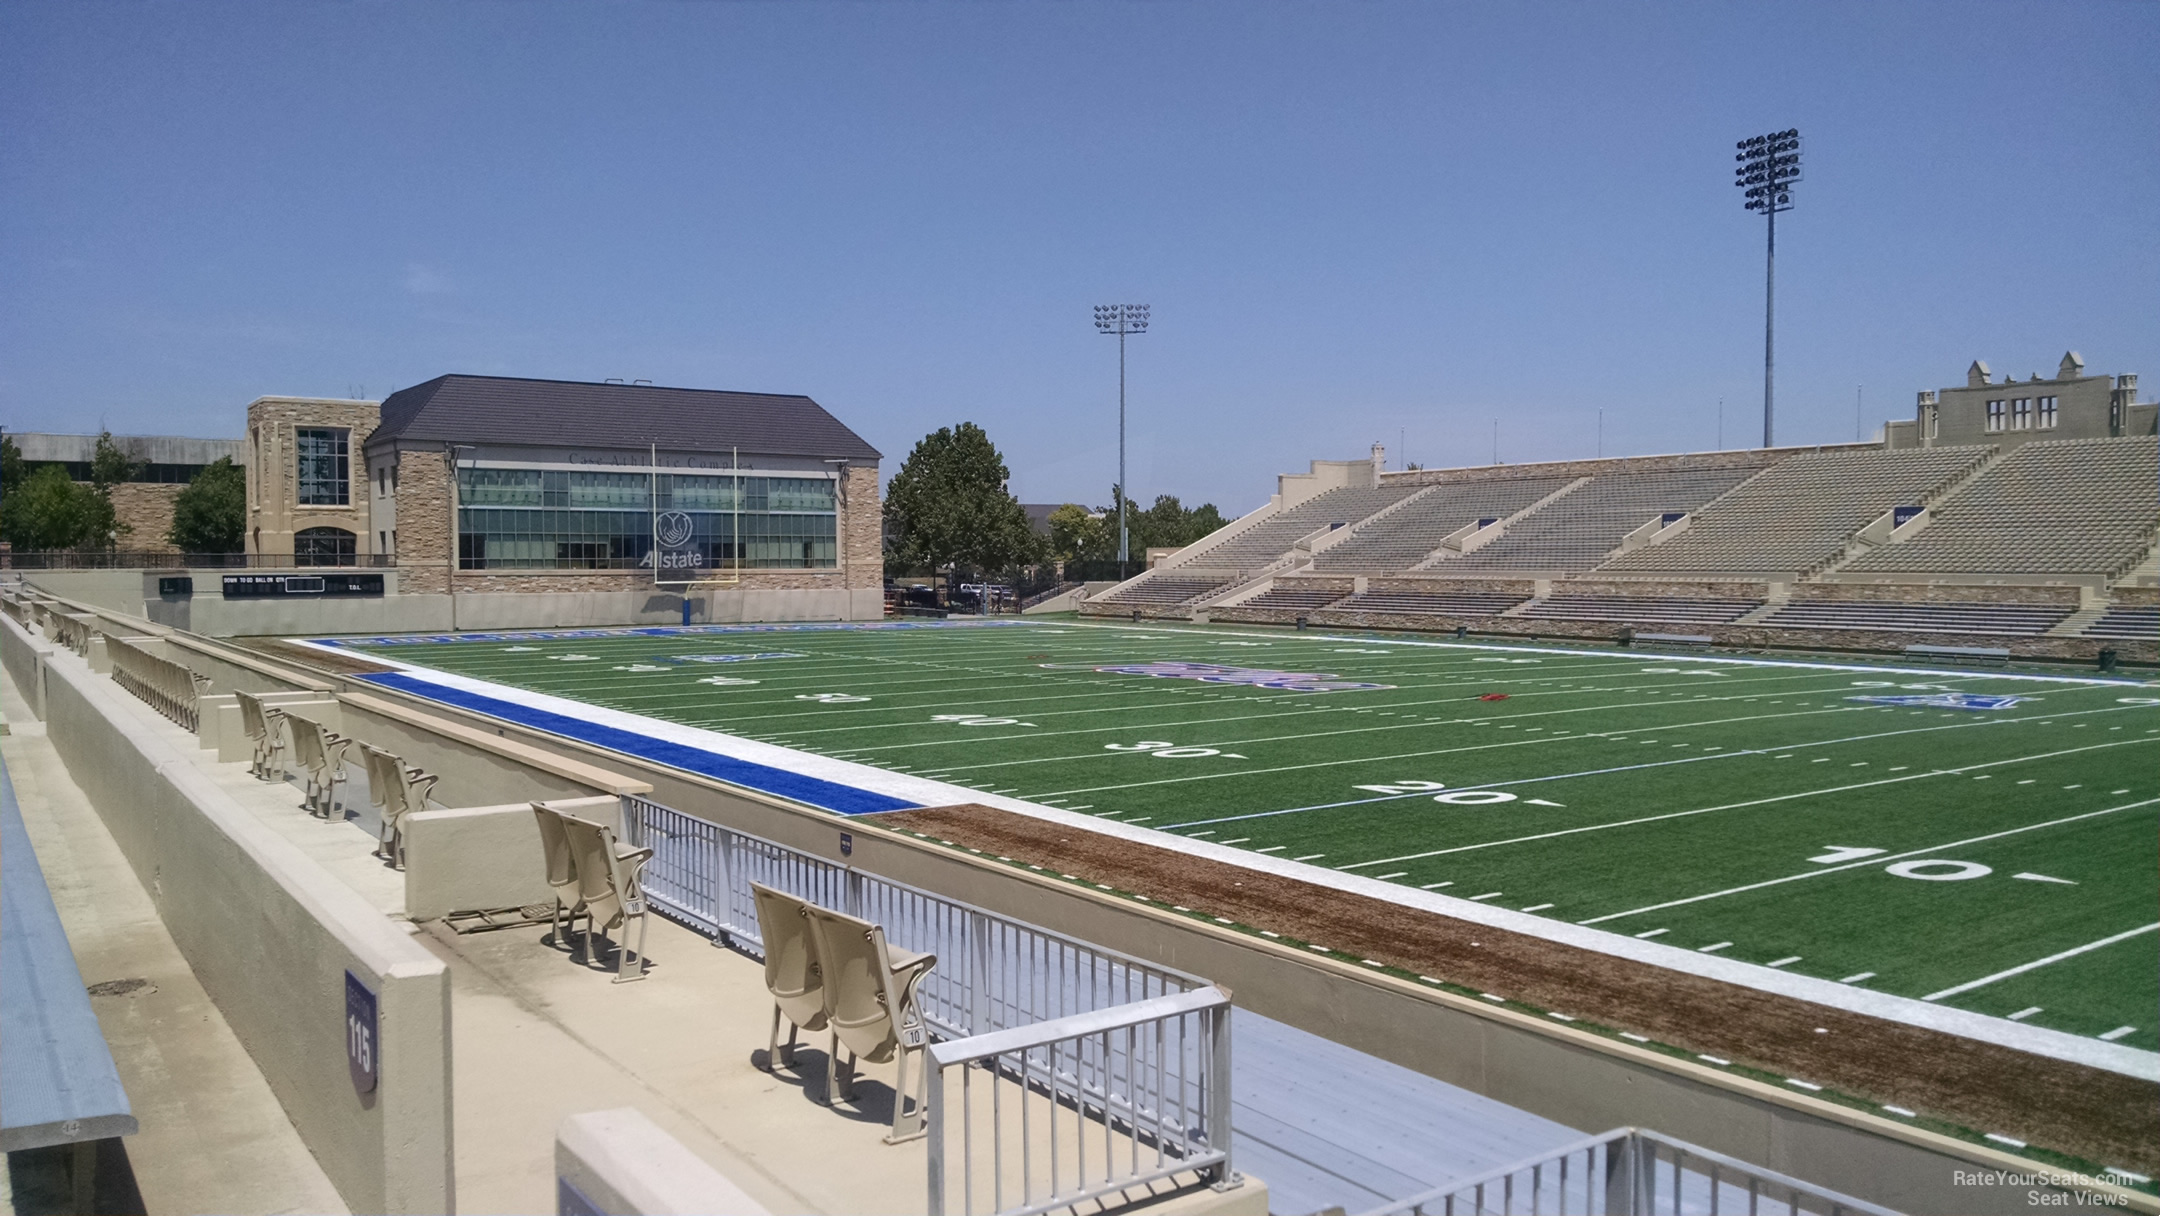 section 114, row 15 seat view  - h.a. chapman stadium